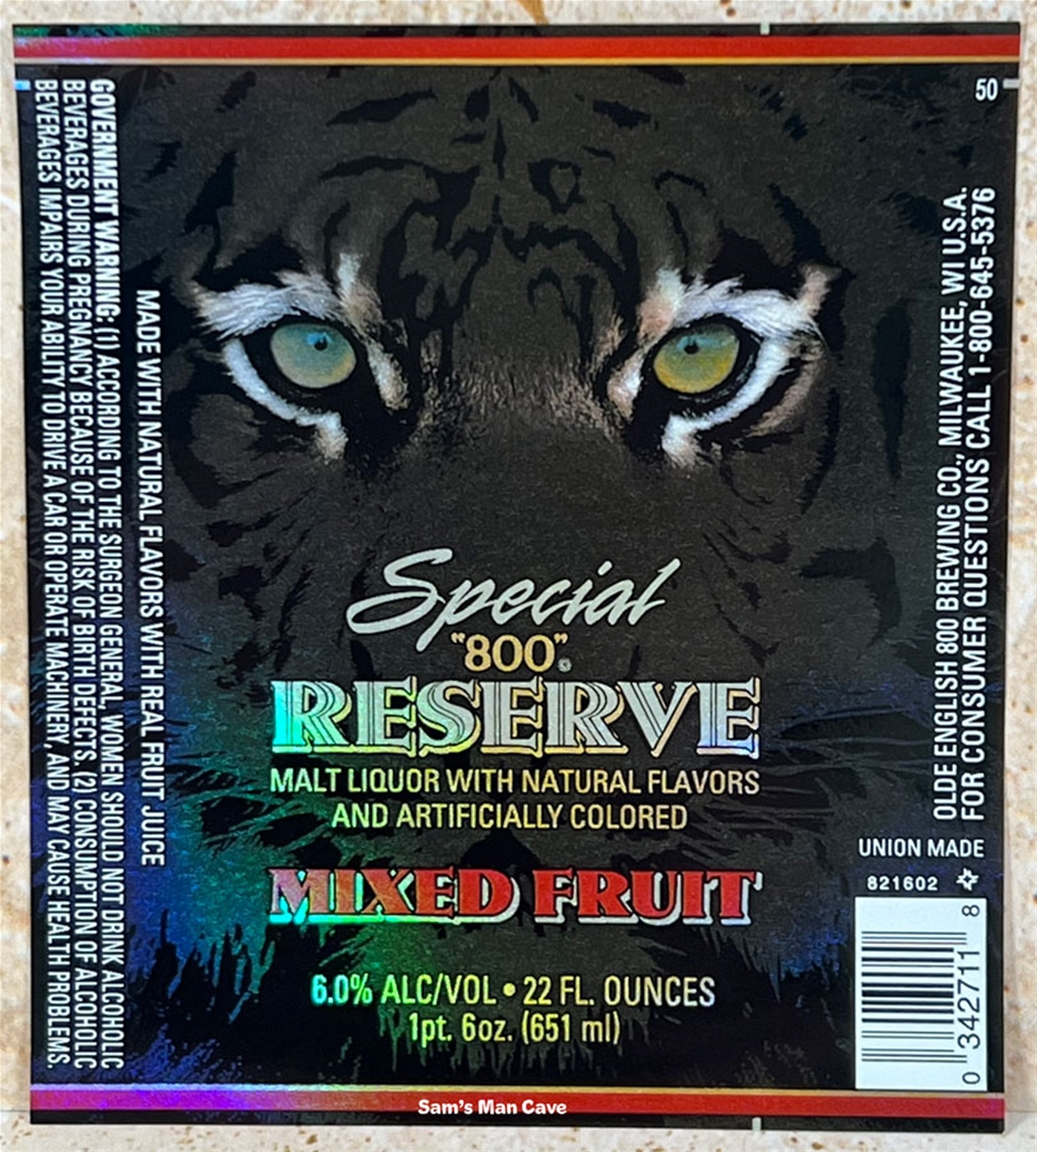 Special 800 Reserve Mixed Fruit Beer Label